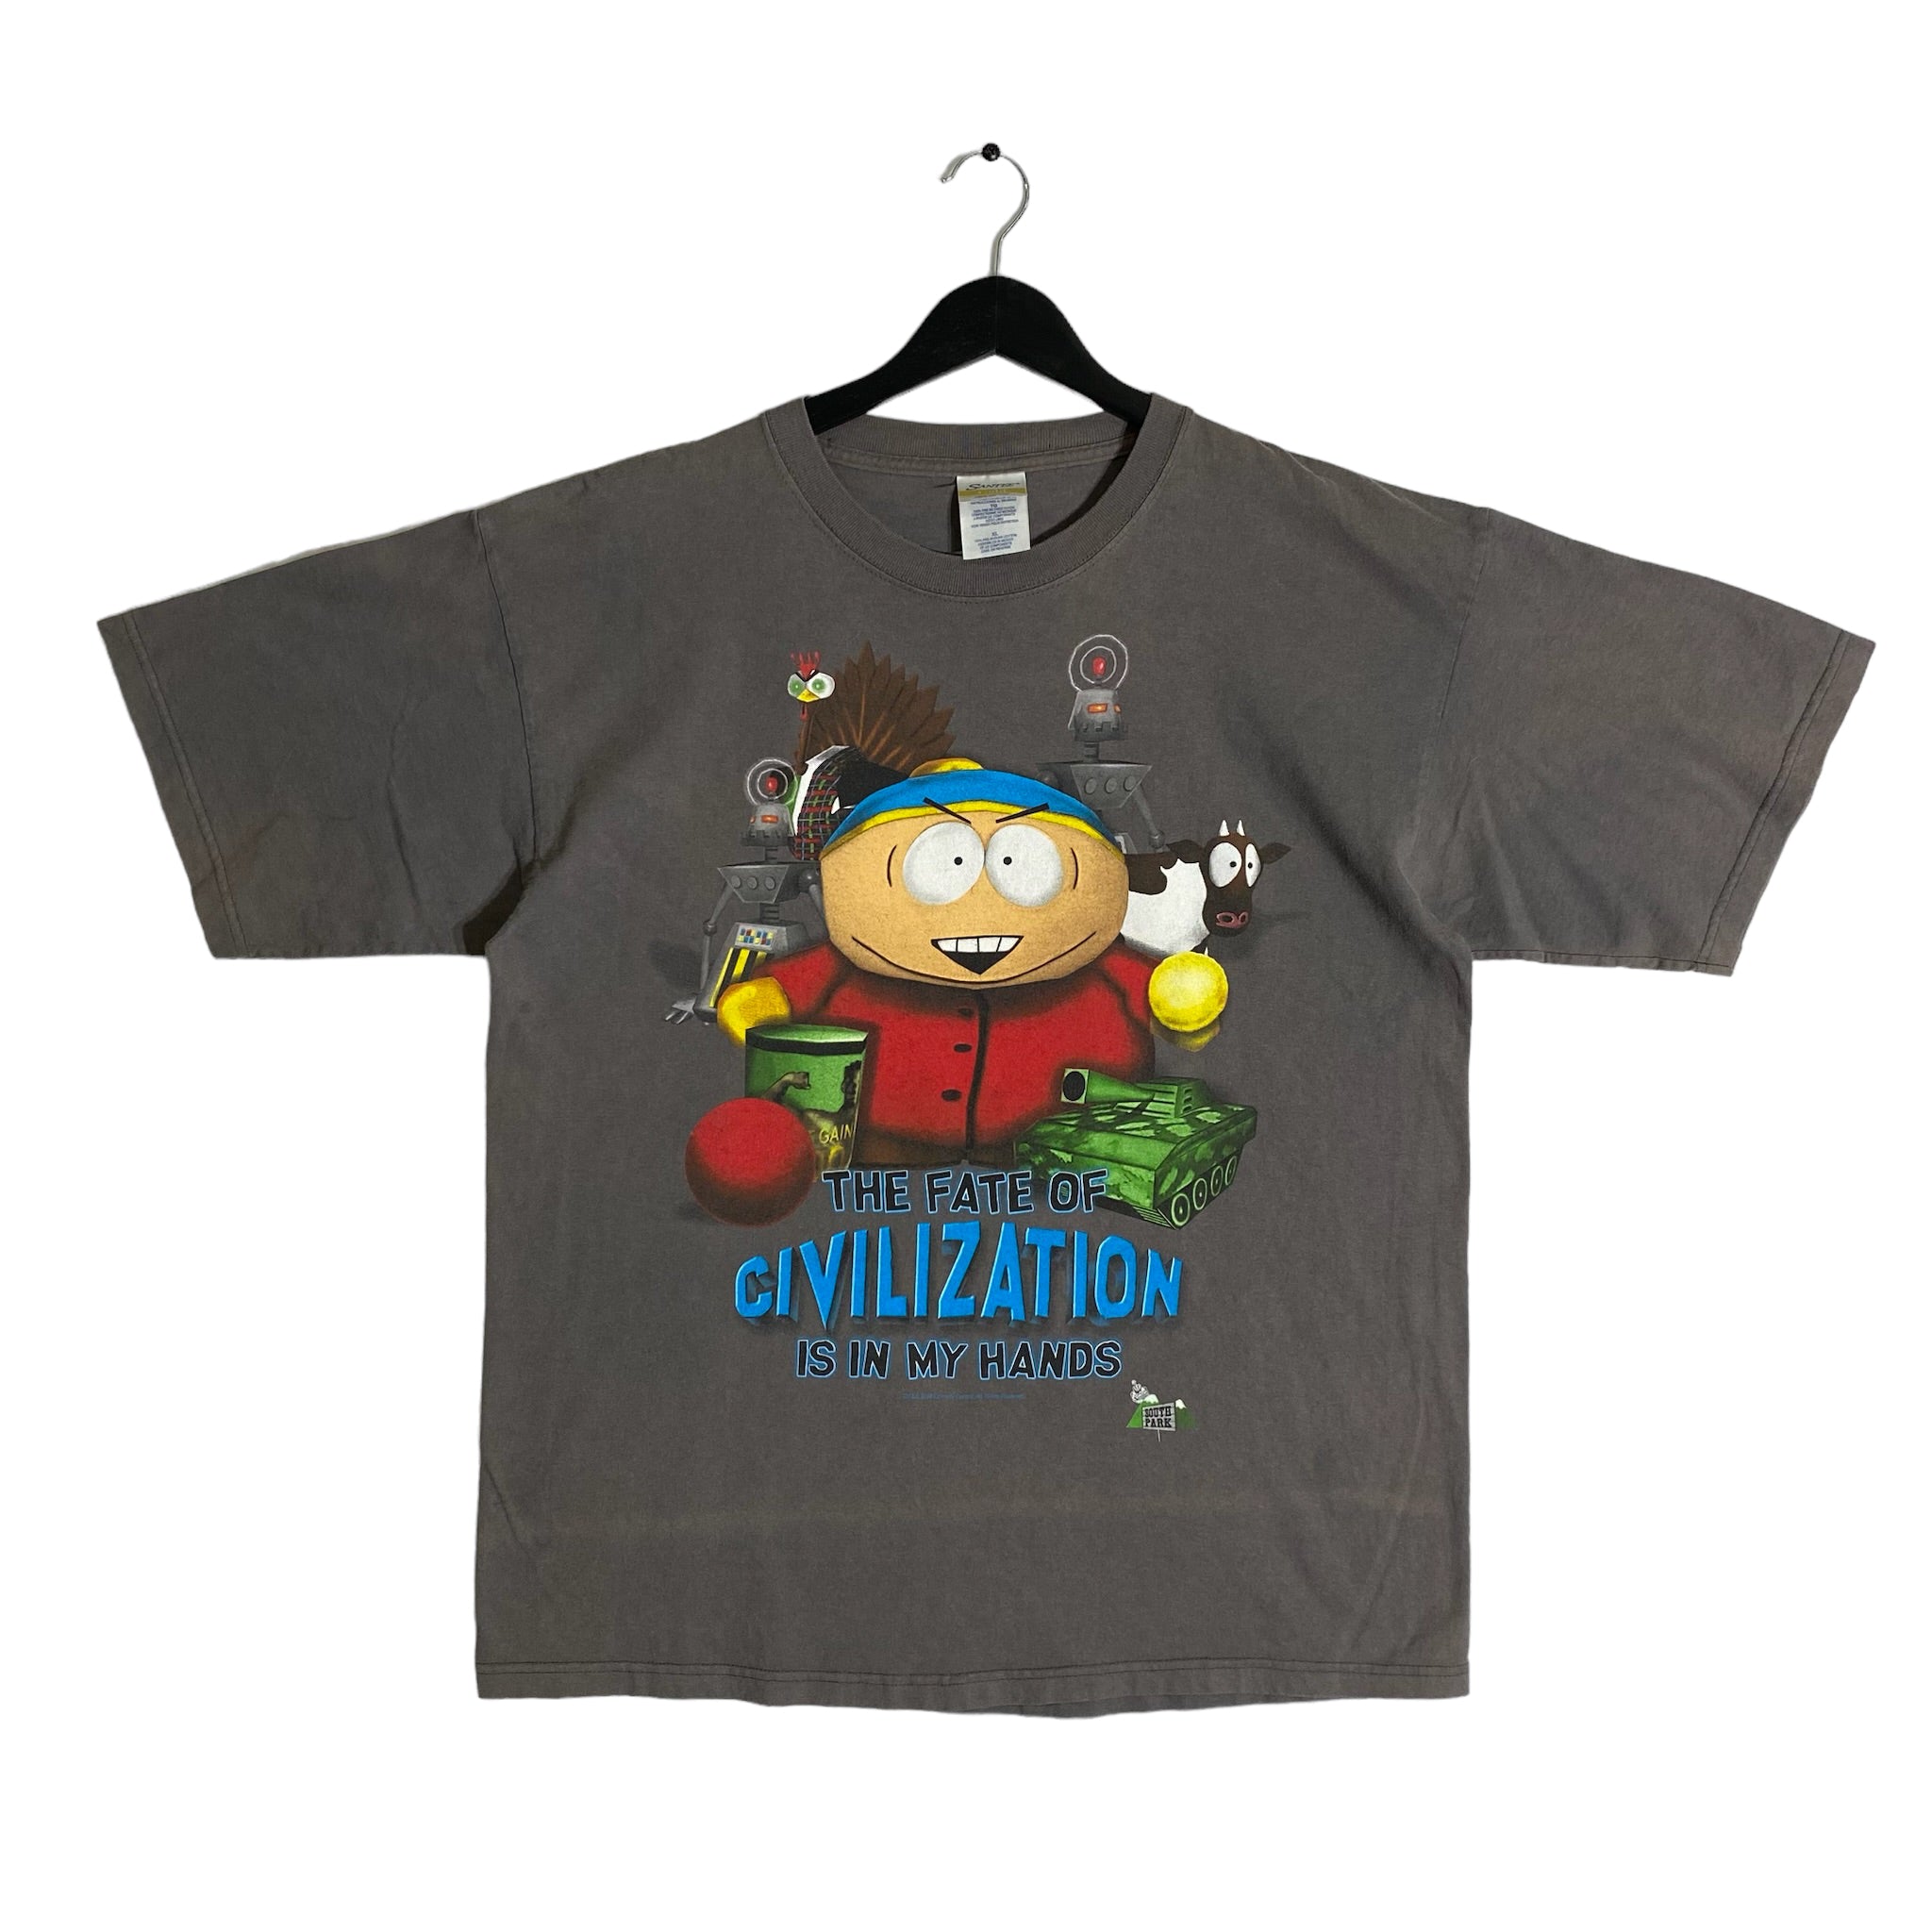 Vintage South Park Cartman "The Fate Of Civilization Is In My Hands" Shirt 1998